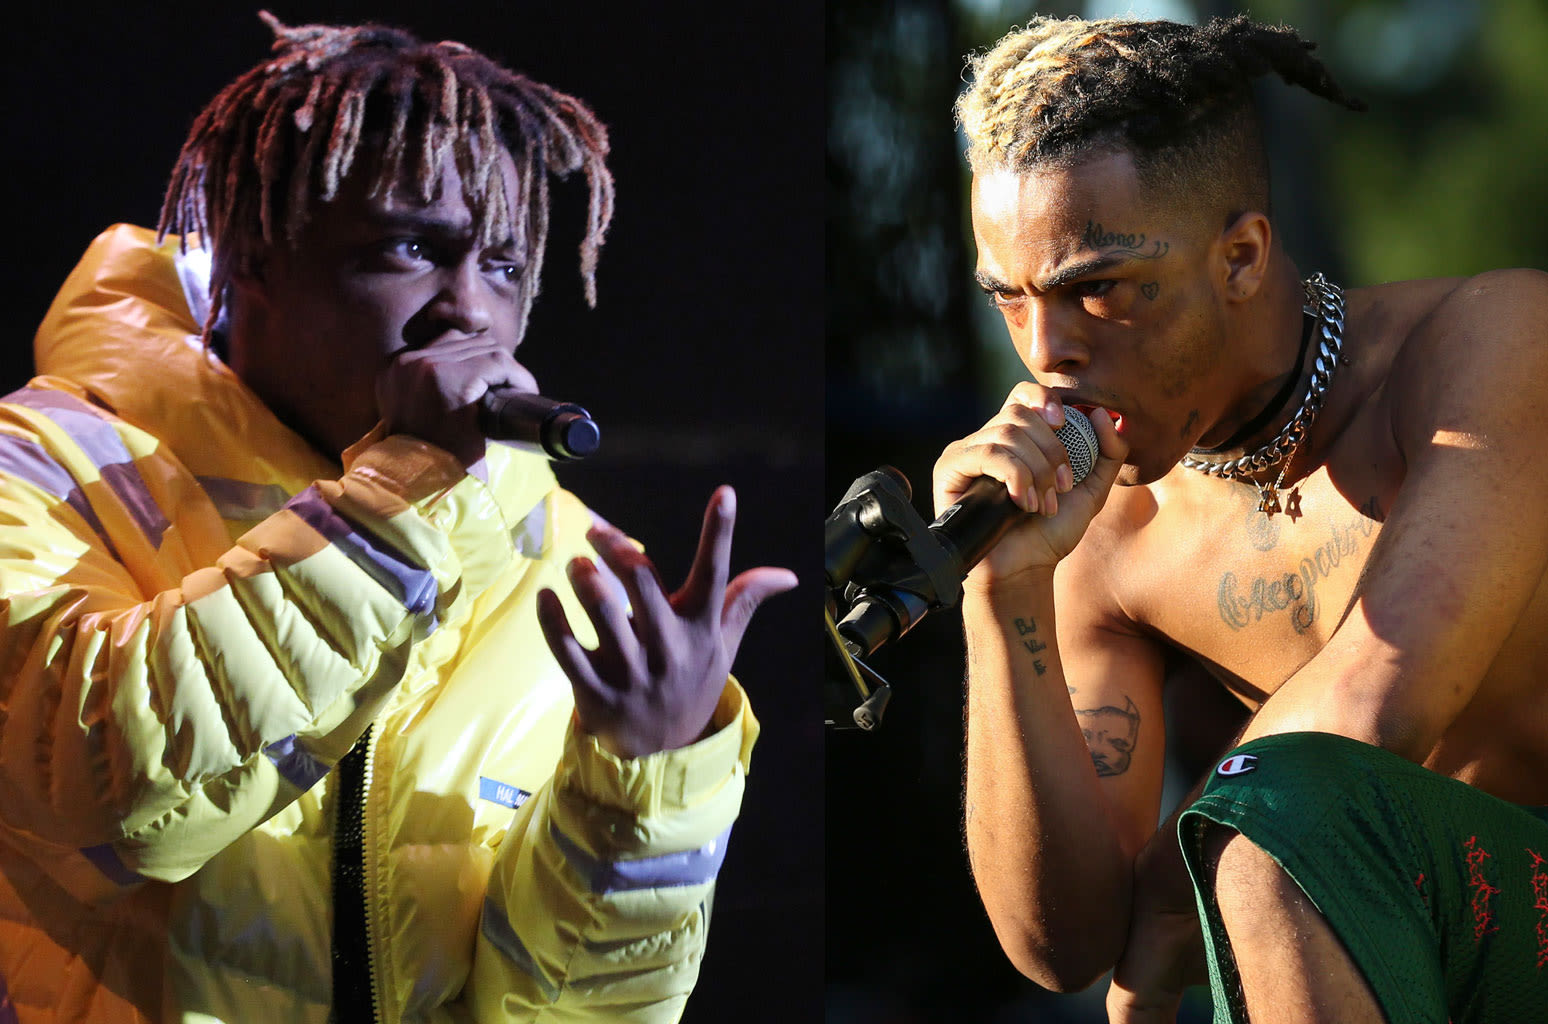 Two Posthumous XXXTentacion & Juice WRLD Collabs Could Be on the Way